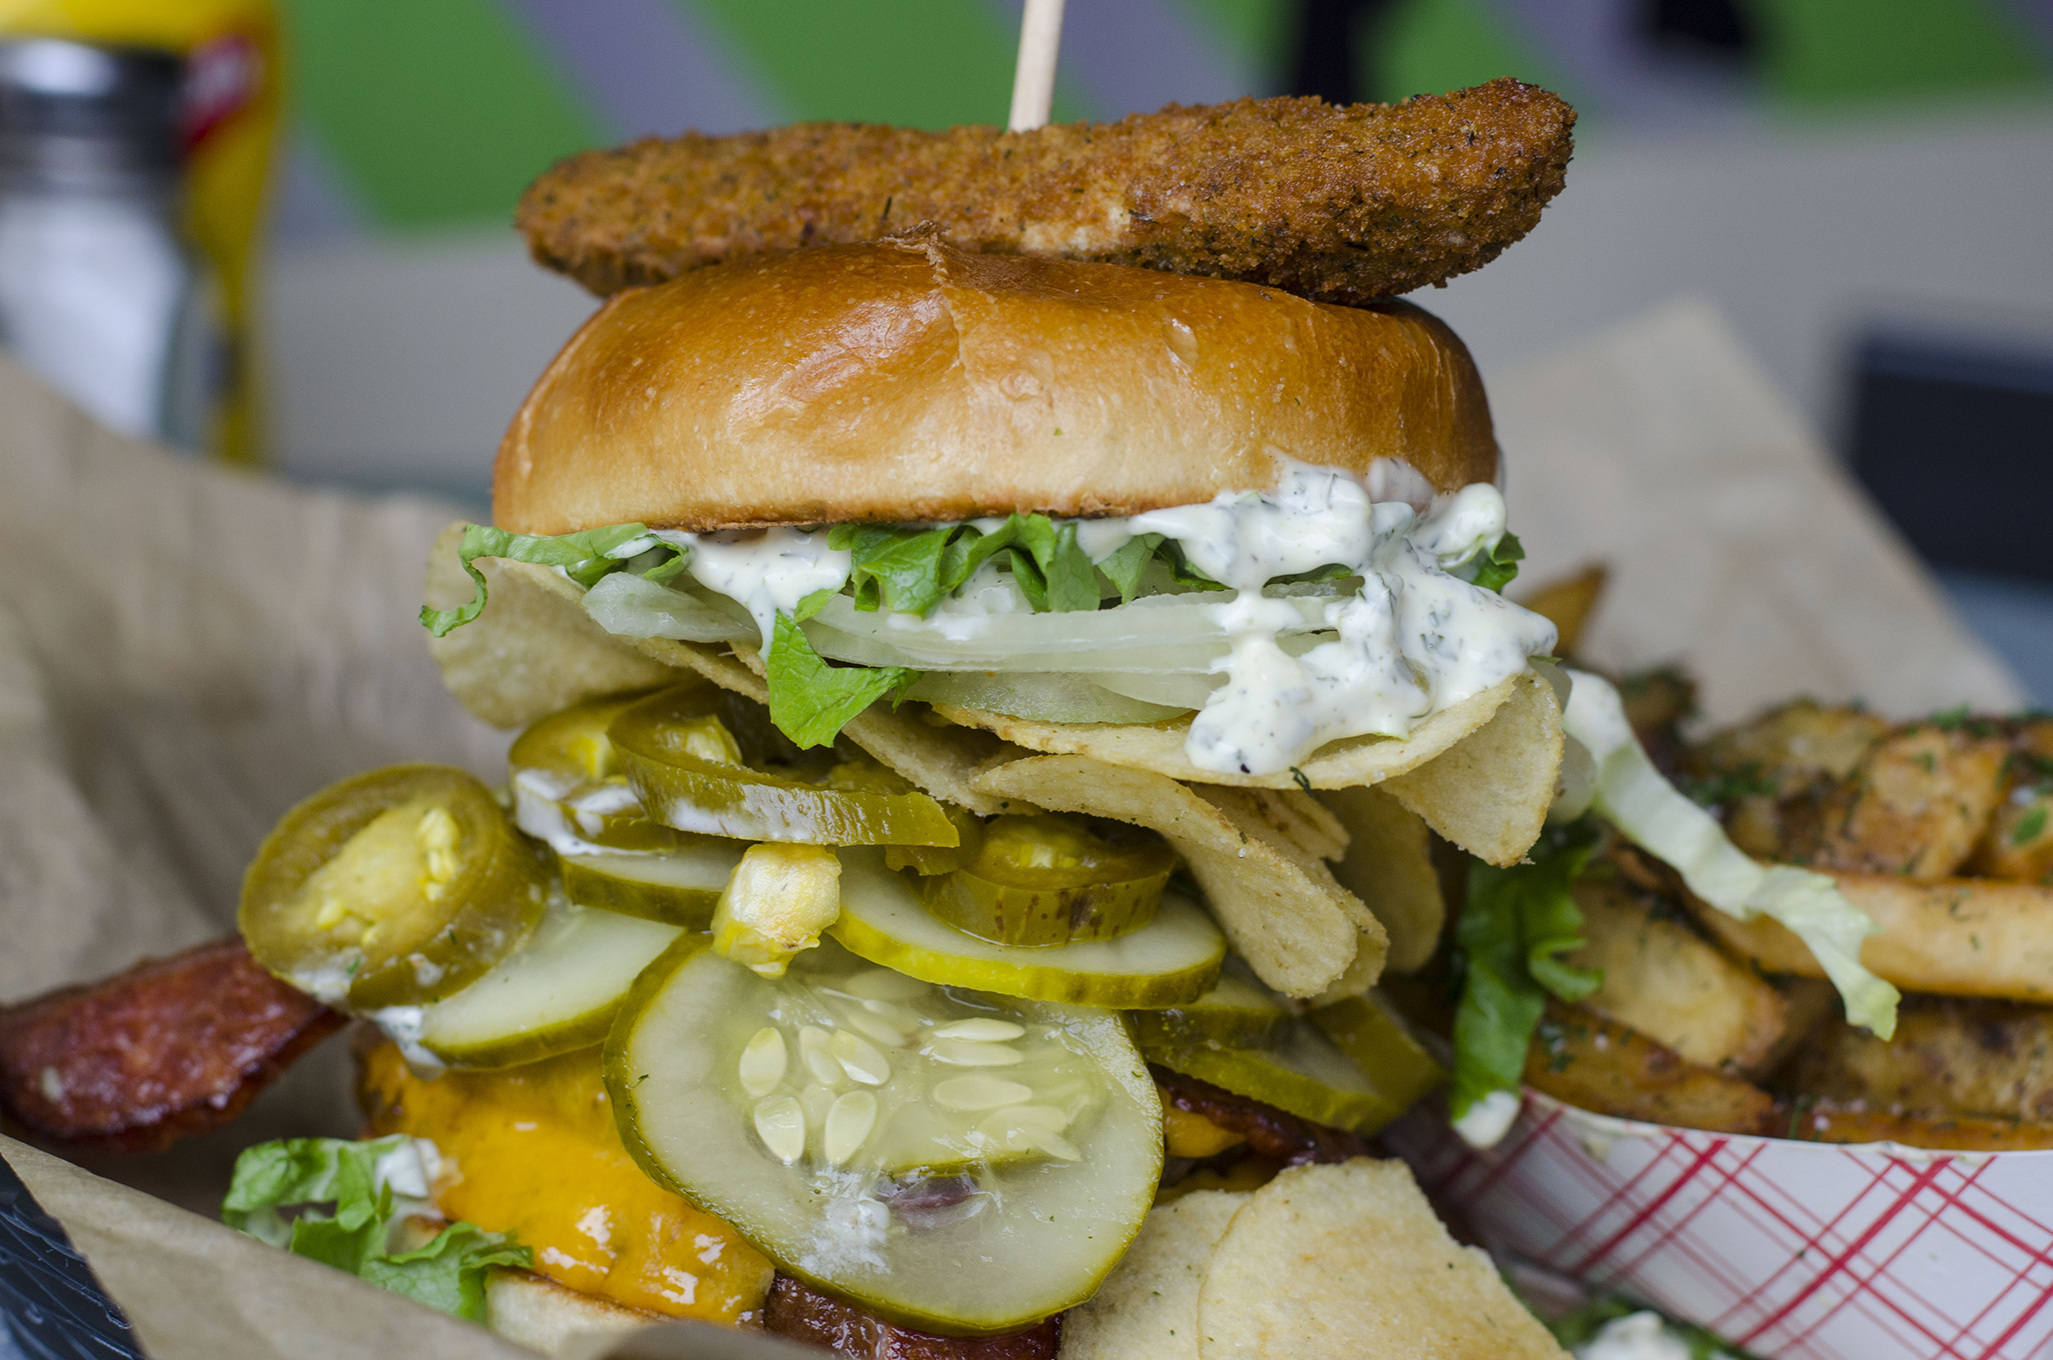 The Pickle Bac burger from Mamo Burger Bar in Windsor, Ontario.